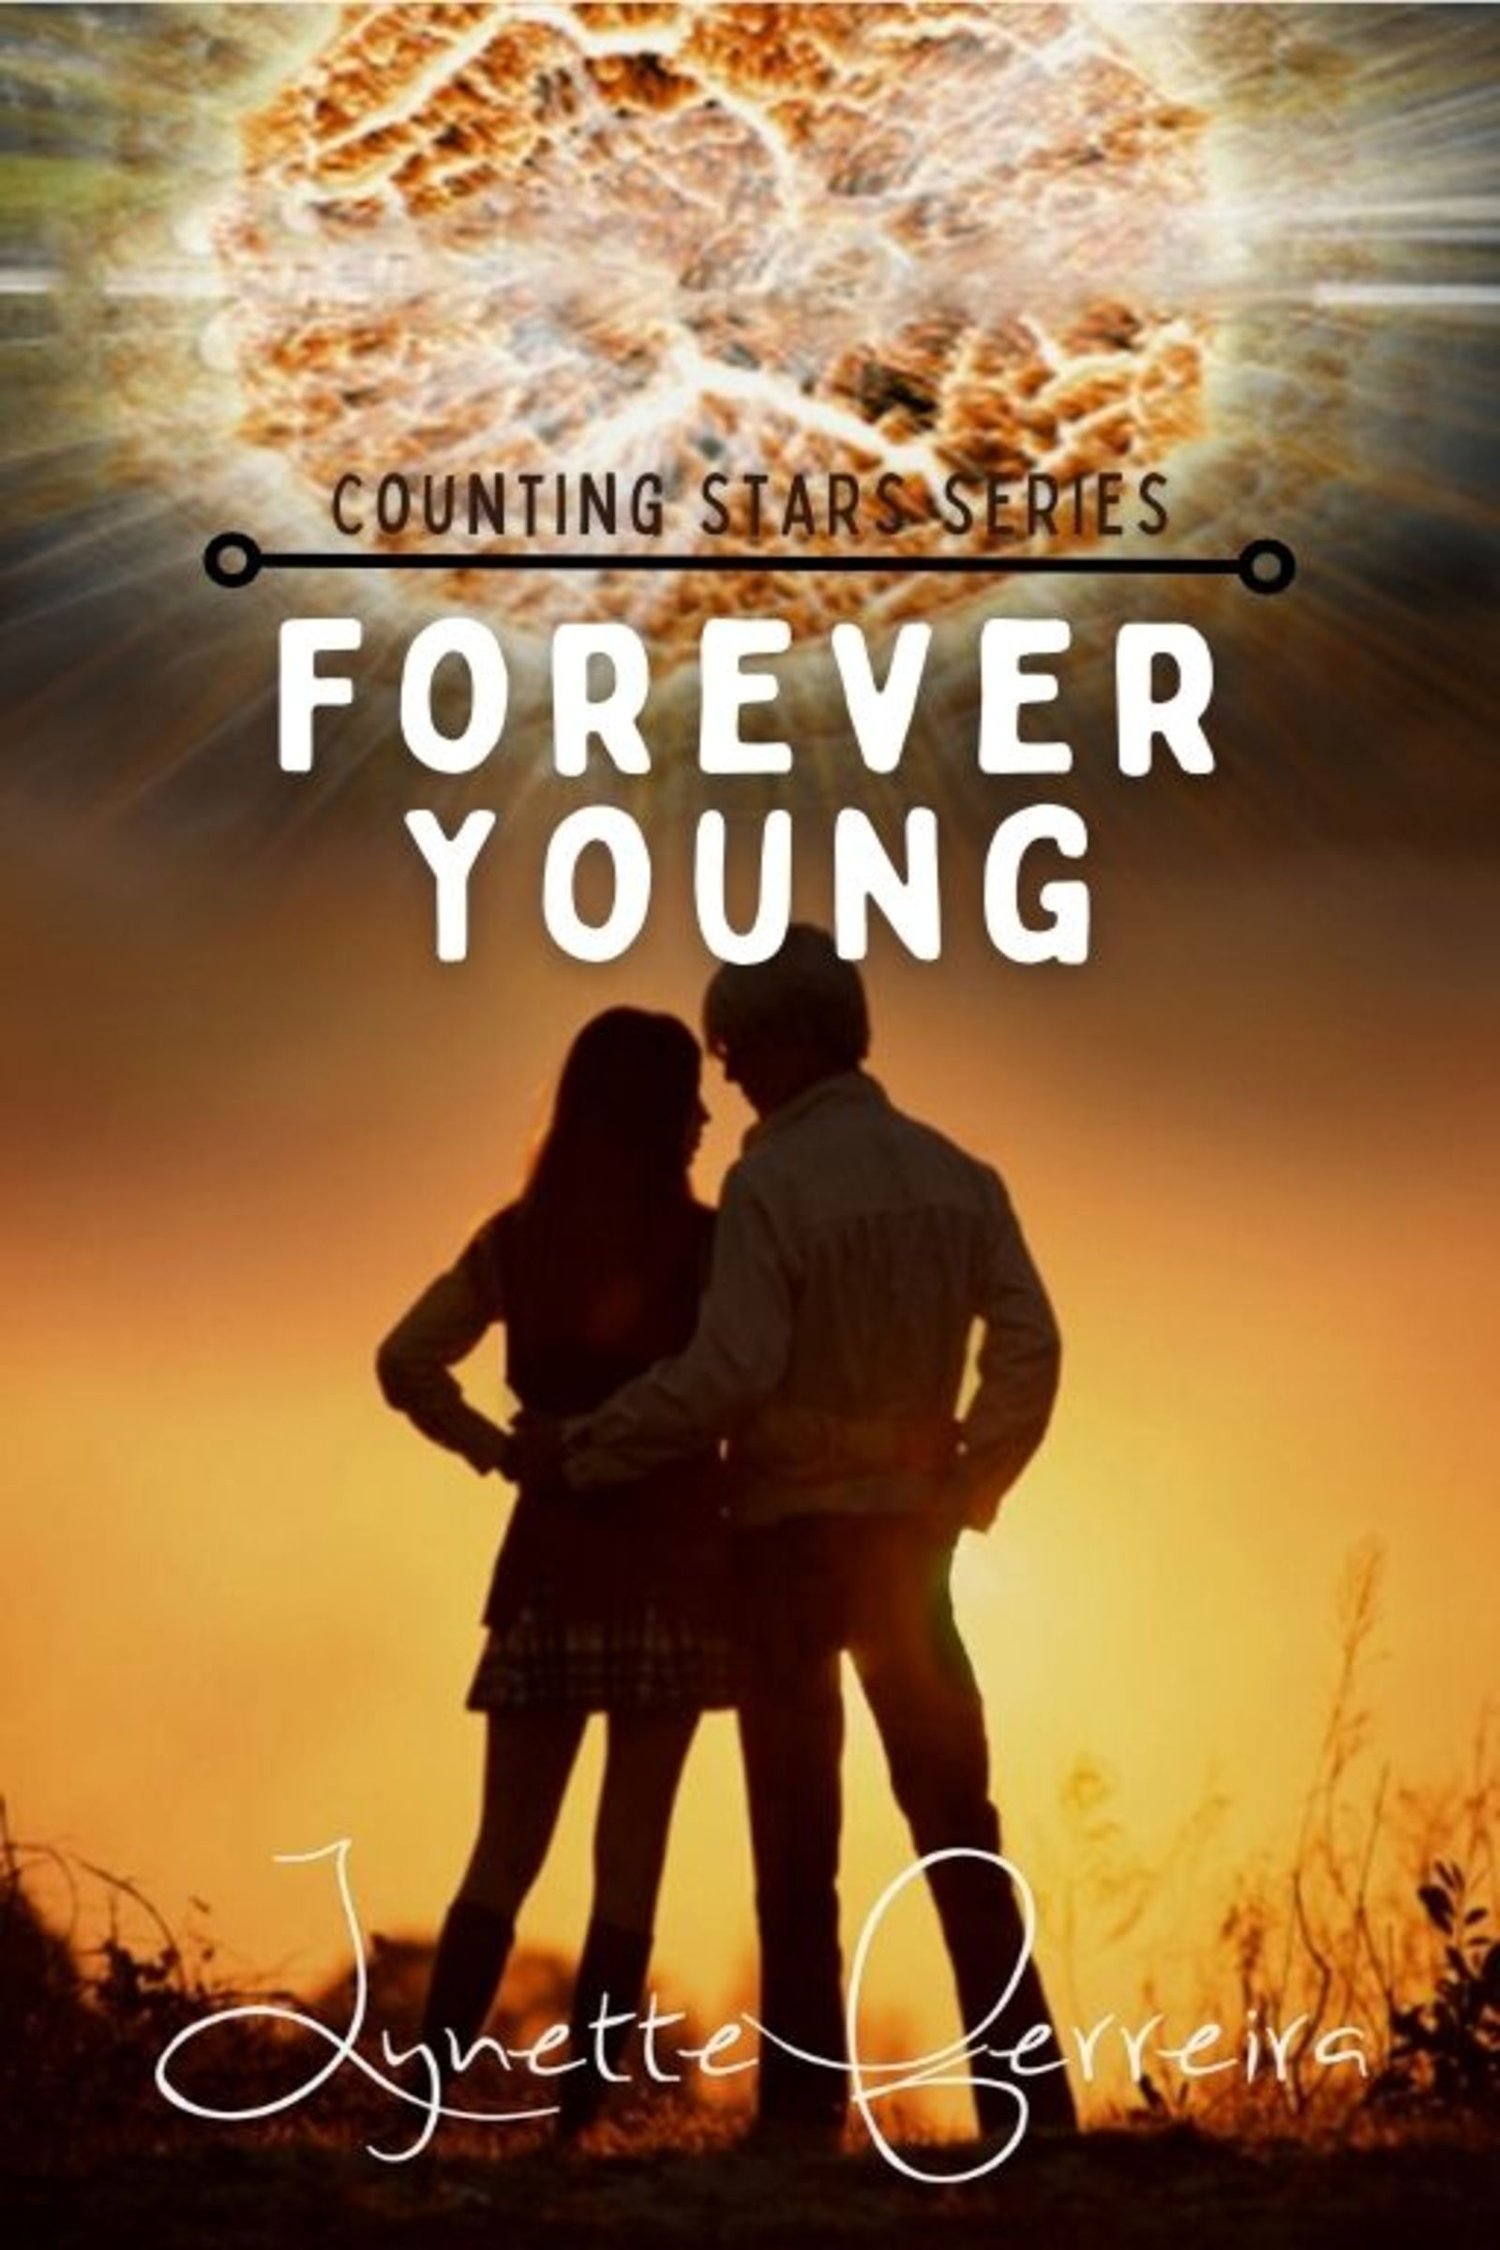 Forever Young by Lynette Ferreira